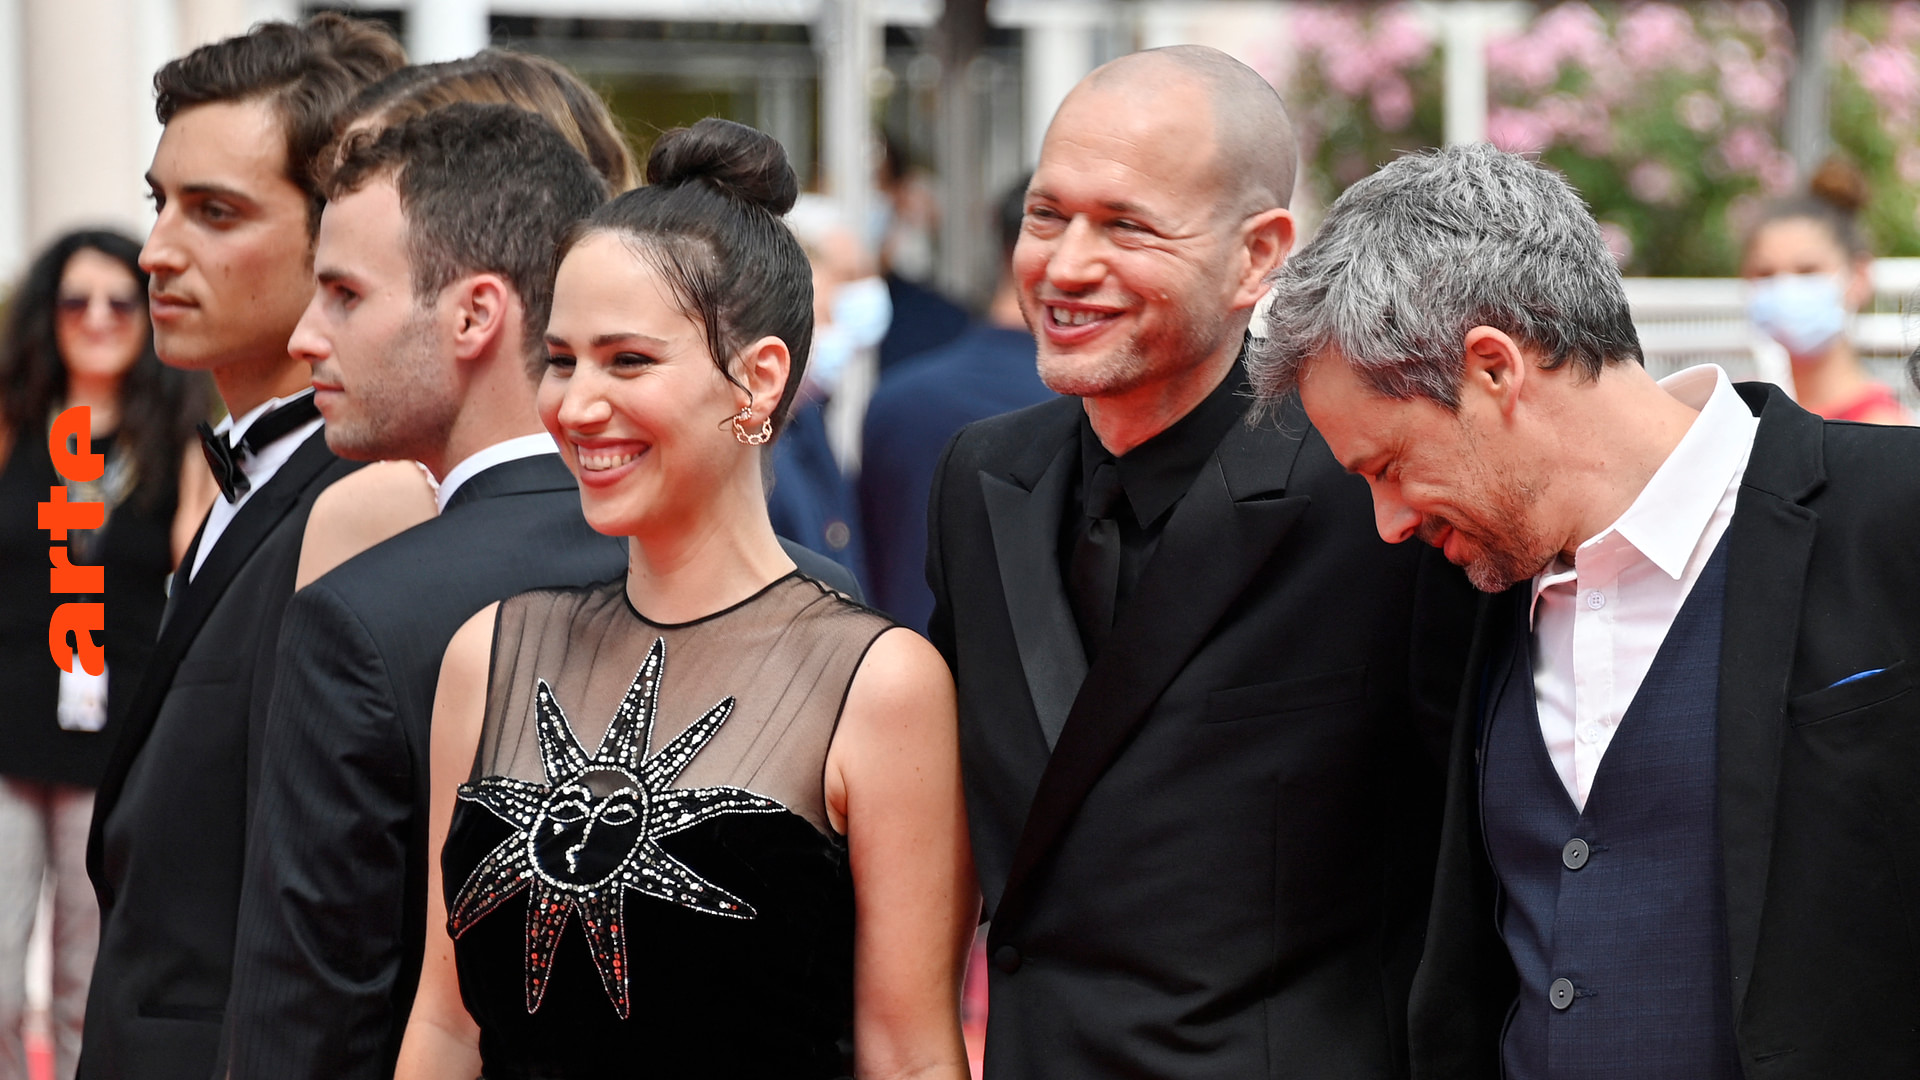 Aheds Knie auf dem Filmfestival Cannes